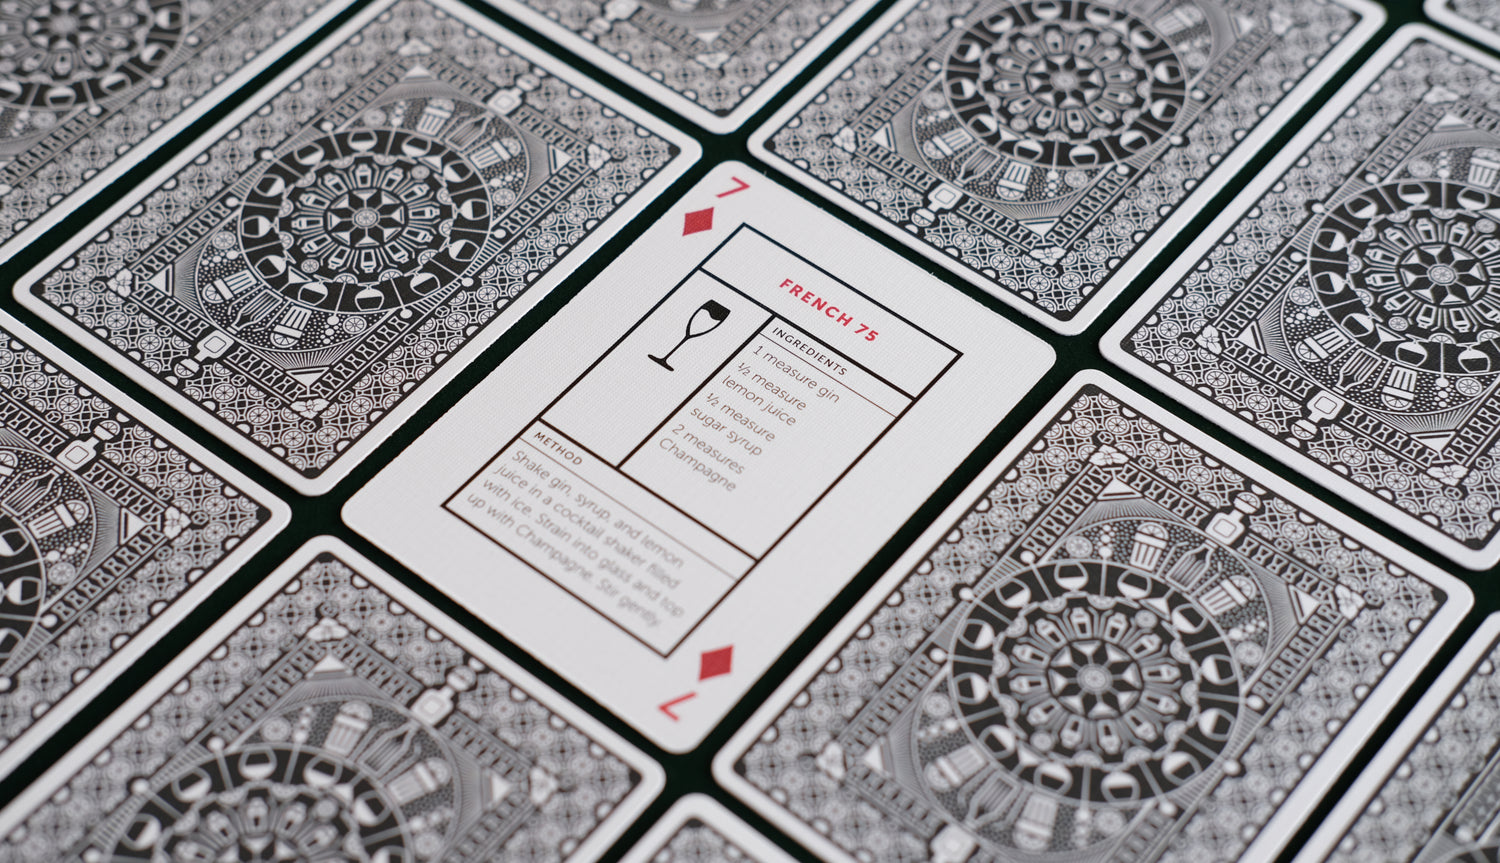 The French 75 Cocktail Card (7 diamonds) shown face up tiled with other cards shown face down.